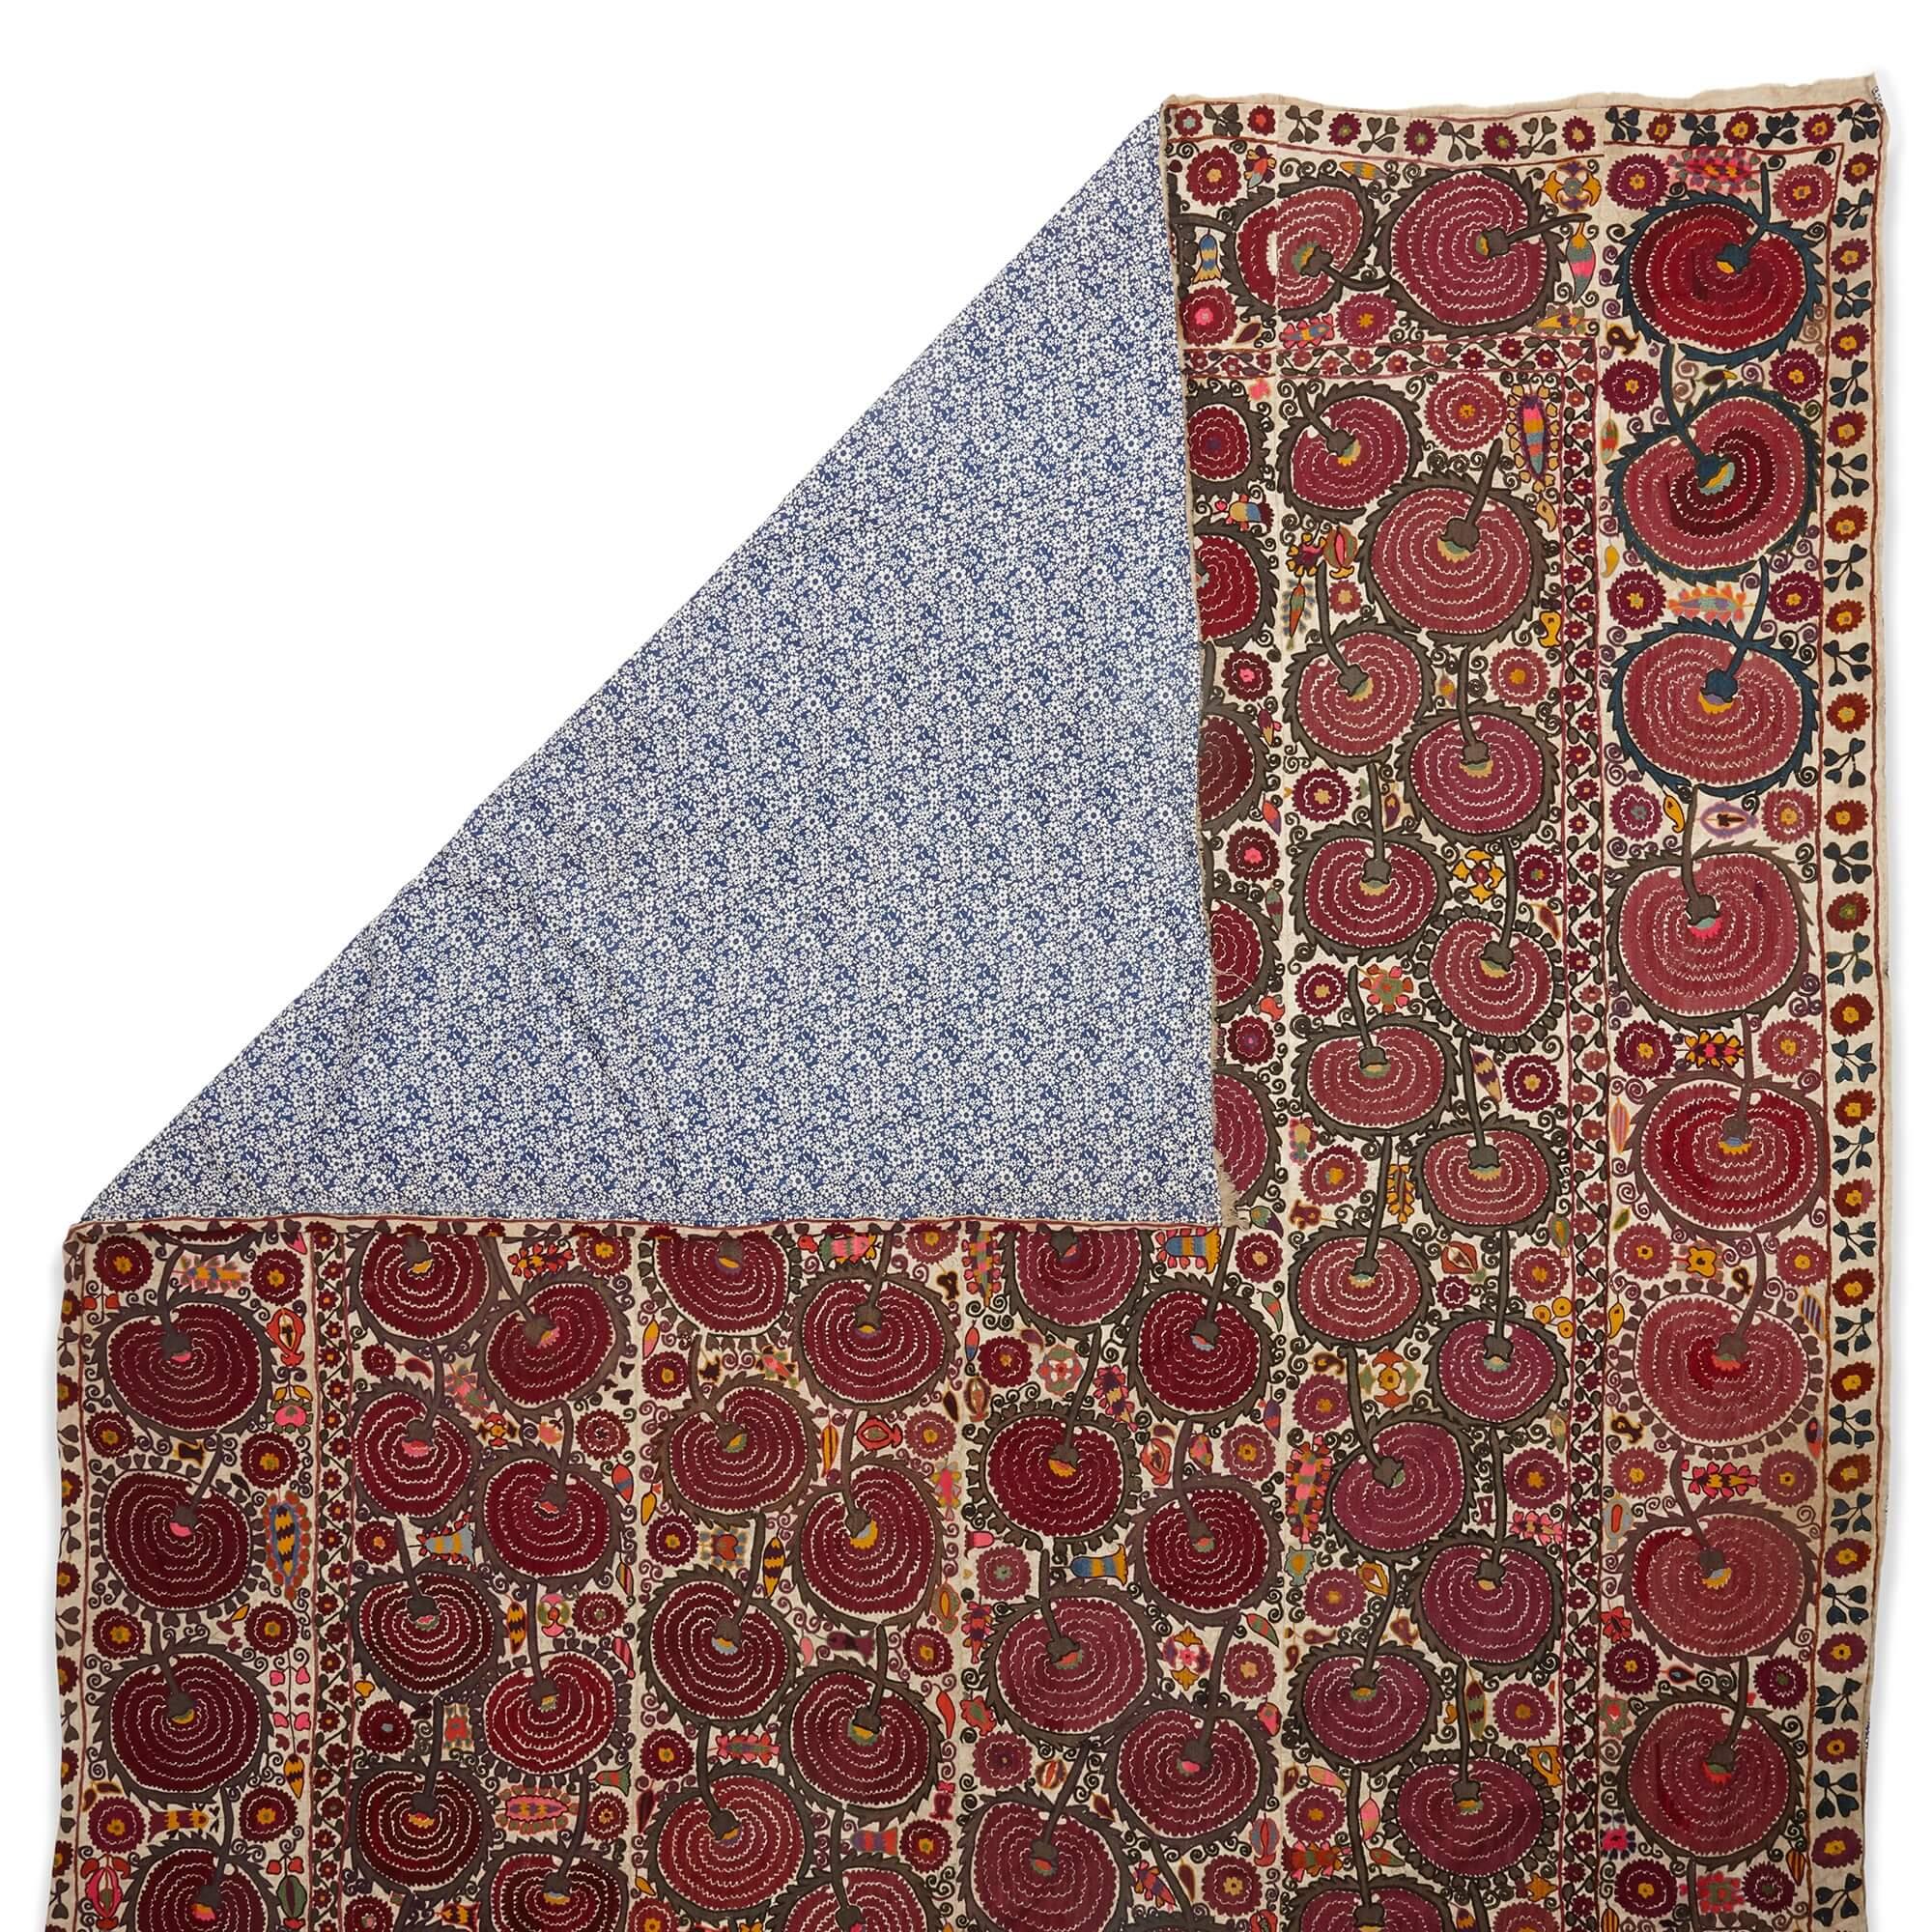 Large 19th century hand-embroidered Bukhara suzani
Uzbekistan, 19th Century
Length 280cm, width 203cm

This suzani originates from Bukhara, Uzbekistan, where it was crafted by nomadic tribes using cotton fabric and delicate hand-embroidery